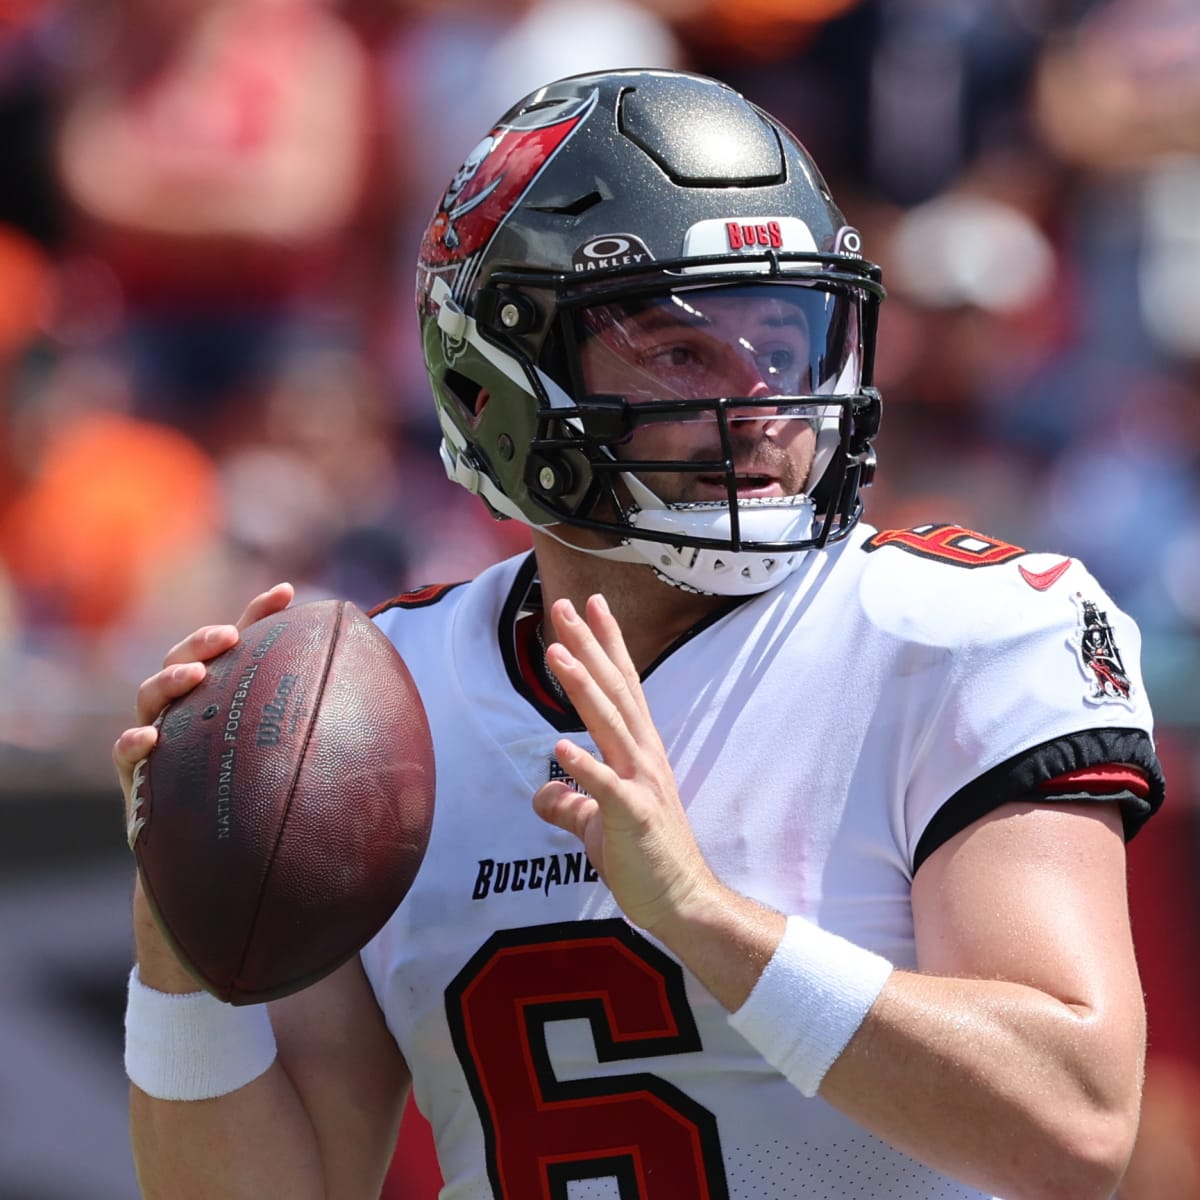 2023 season preview: How will Mayfield, Buccaneers do this year